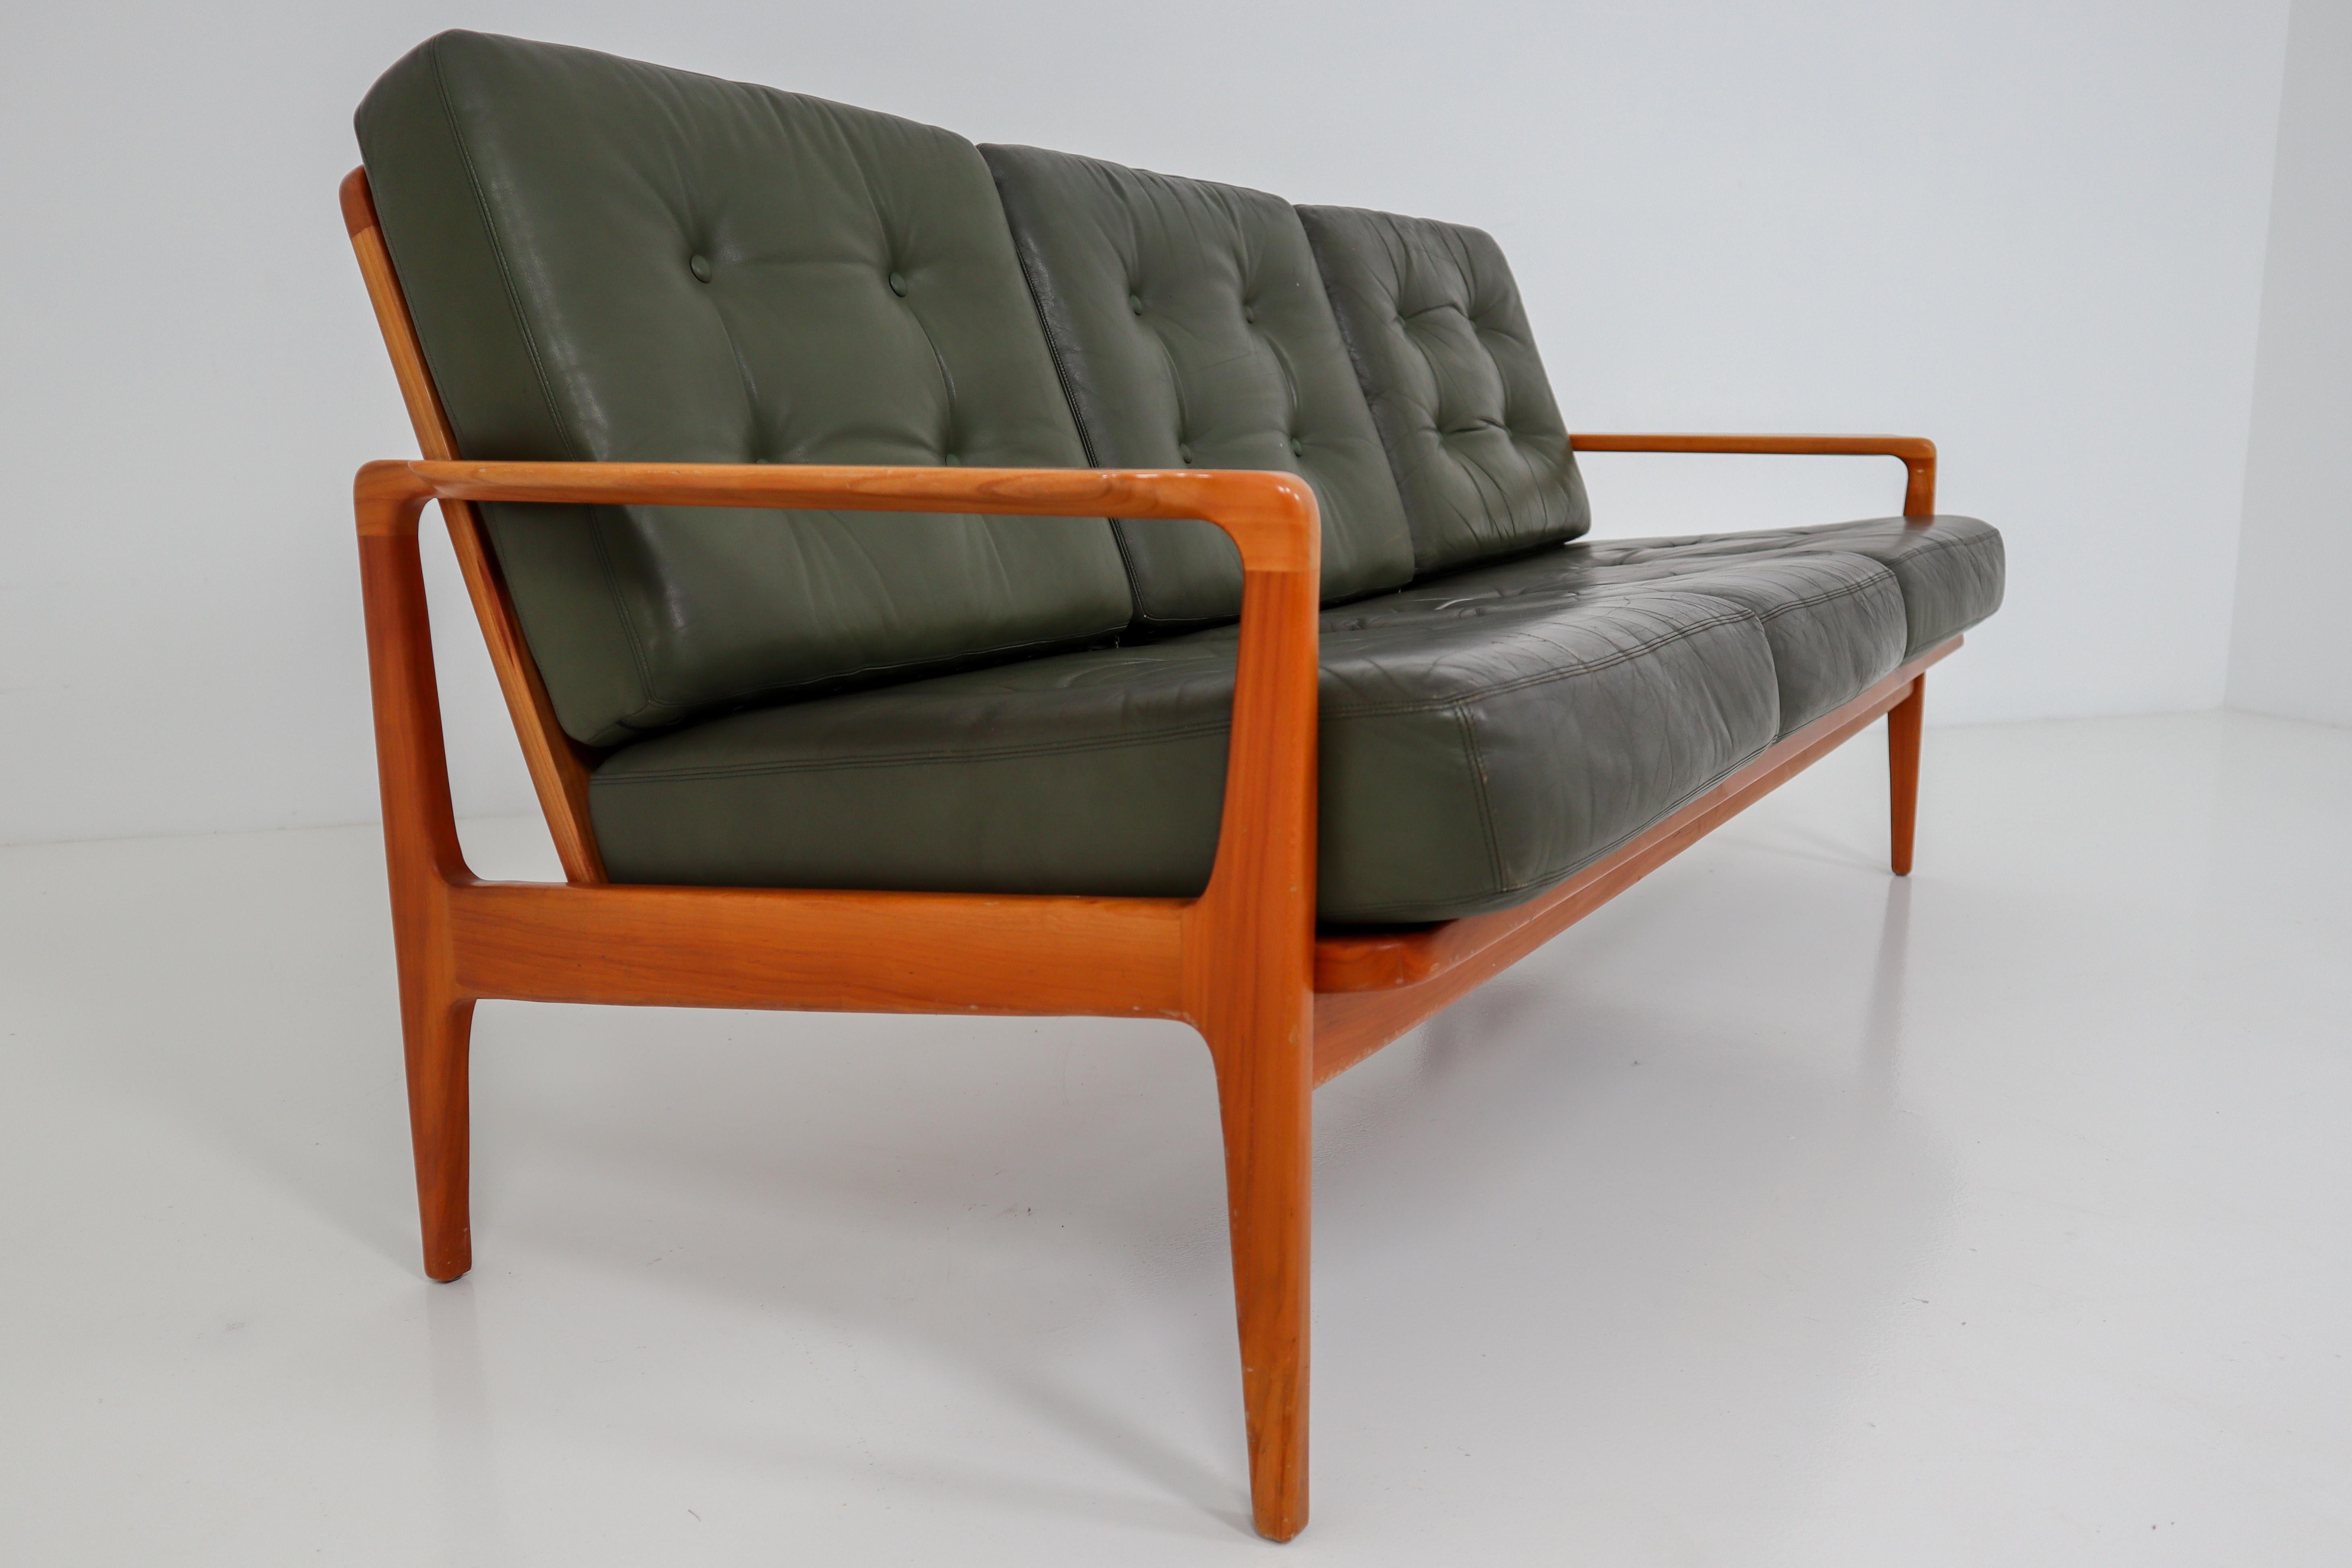 Midcentury Danish three-seat sofa by Arne Wahl Iversen, 1960s. Original cushion in green leather in very good condition.